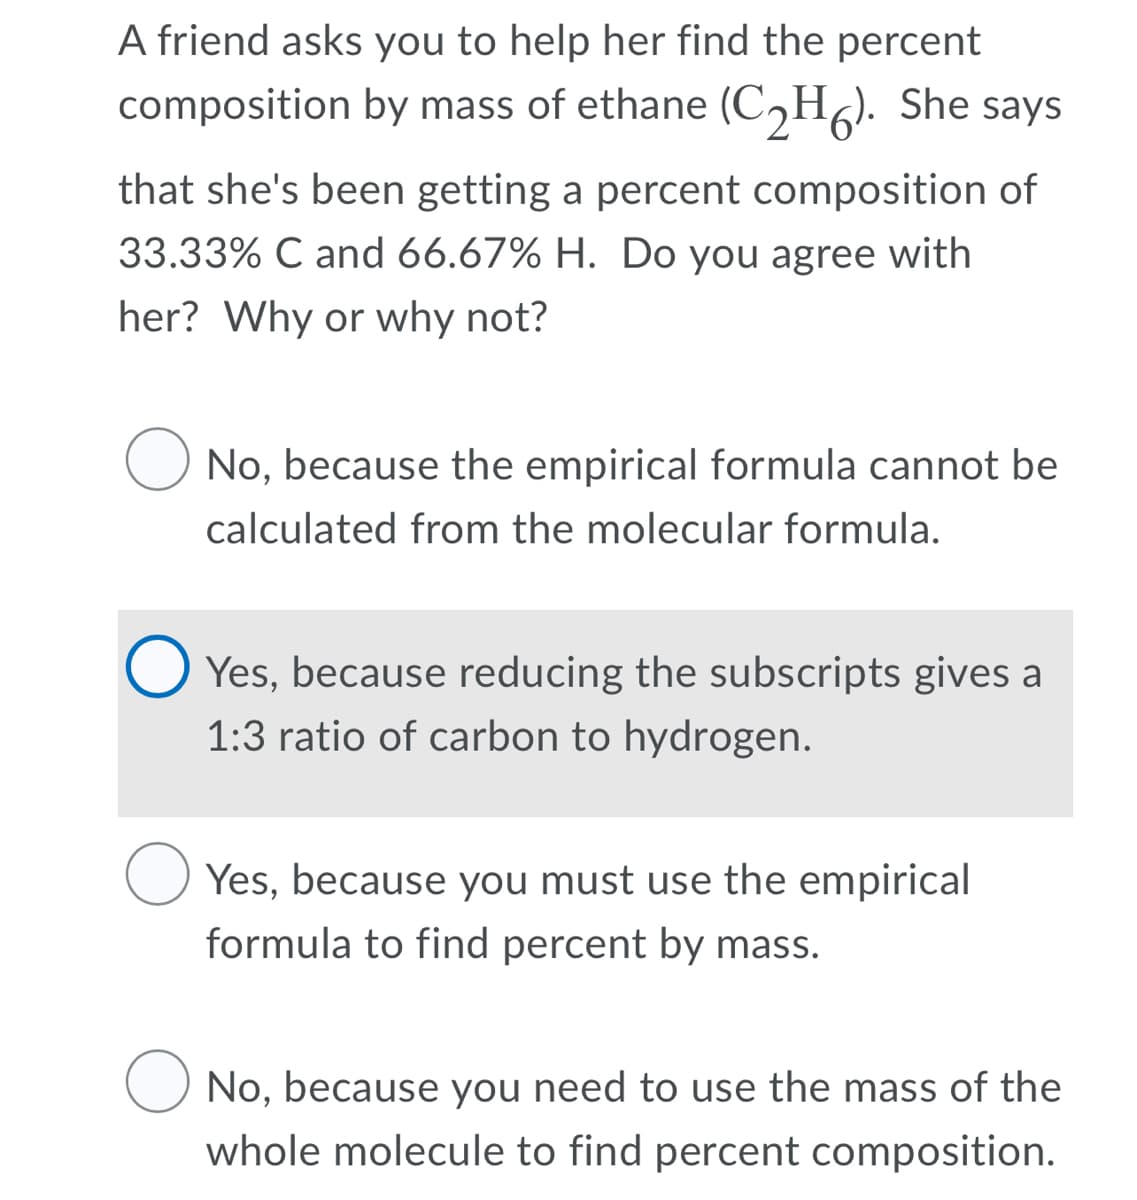 A friend asks you to help her find the percent
composition by mass of ethane (C,H). She says
that she's been getting a percent composition of
33.33% C and 66.67% H. Do you agree with
her? Why or why not?
O No, because the empirical formula cannot be
calculated from the molecular formula.
O Yes, because reducing the subscripts gives a
1:3 ratio of carbon to hydrogen.
Yes, because you must use the empirical
formula to find percent by mass.
No, because you need to use the mass of the
whole molecule to find percent composition.
